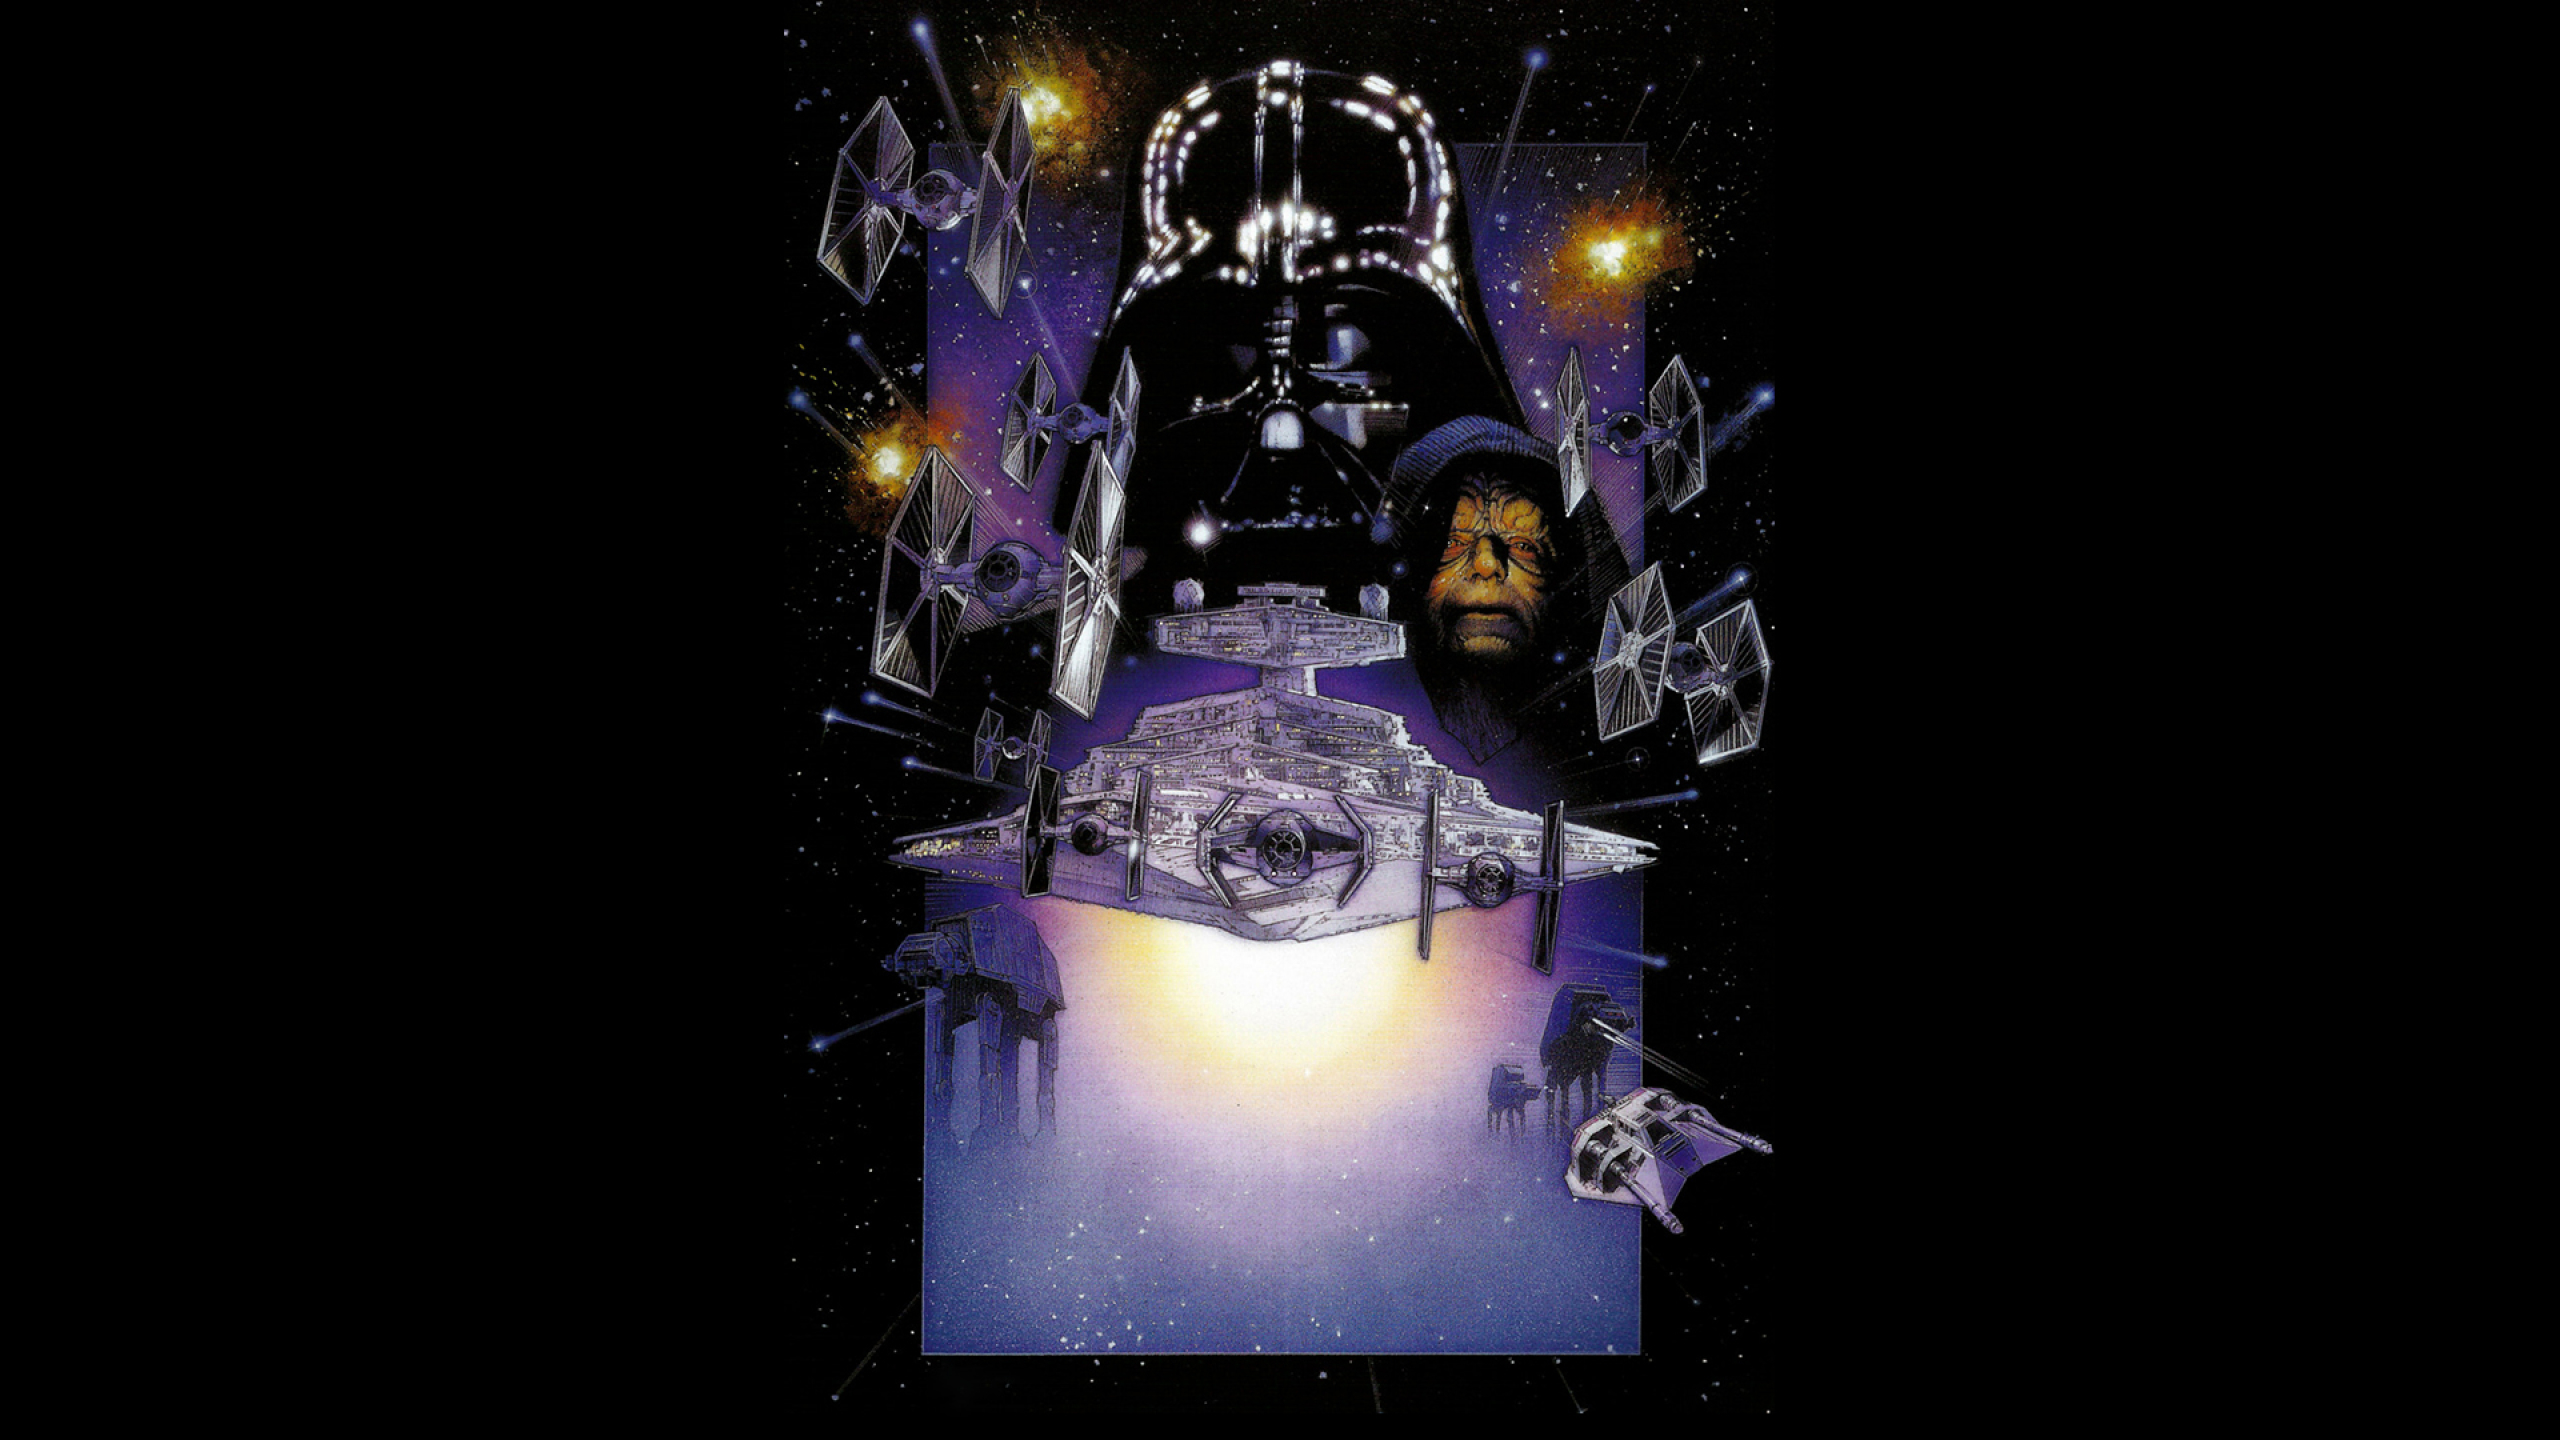 Star Wars The Empire Strikes Back Movies Science Fiction Space George Lucas Darth Vader Emperor Palp 2560x1440